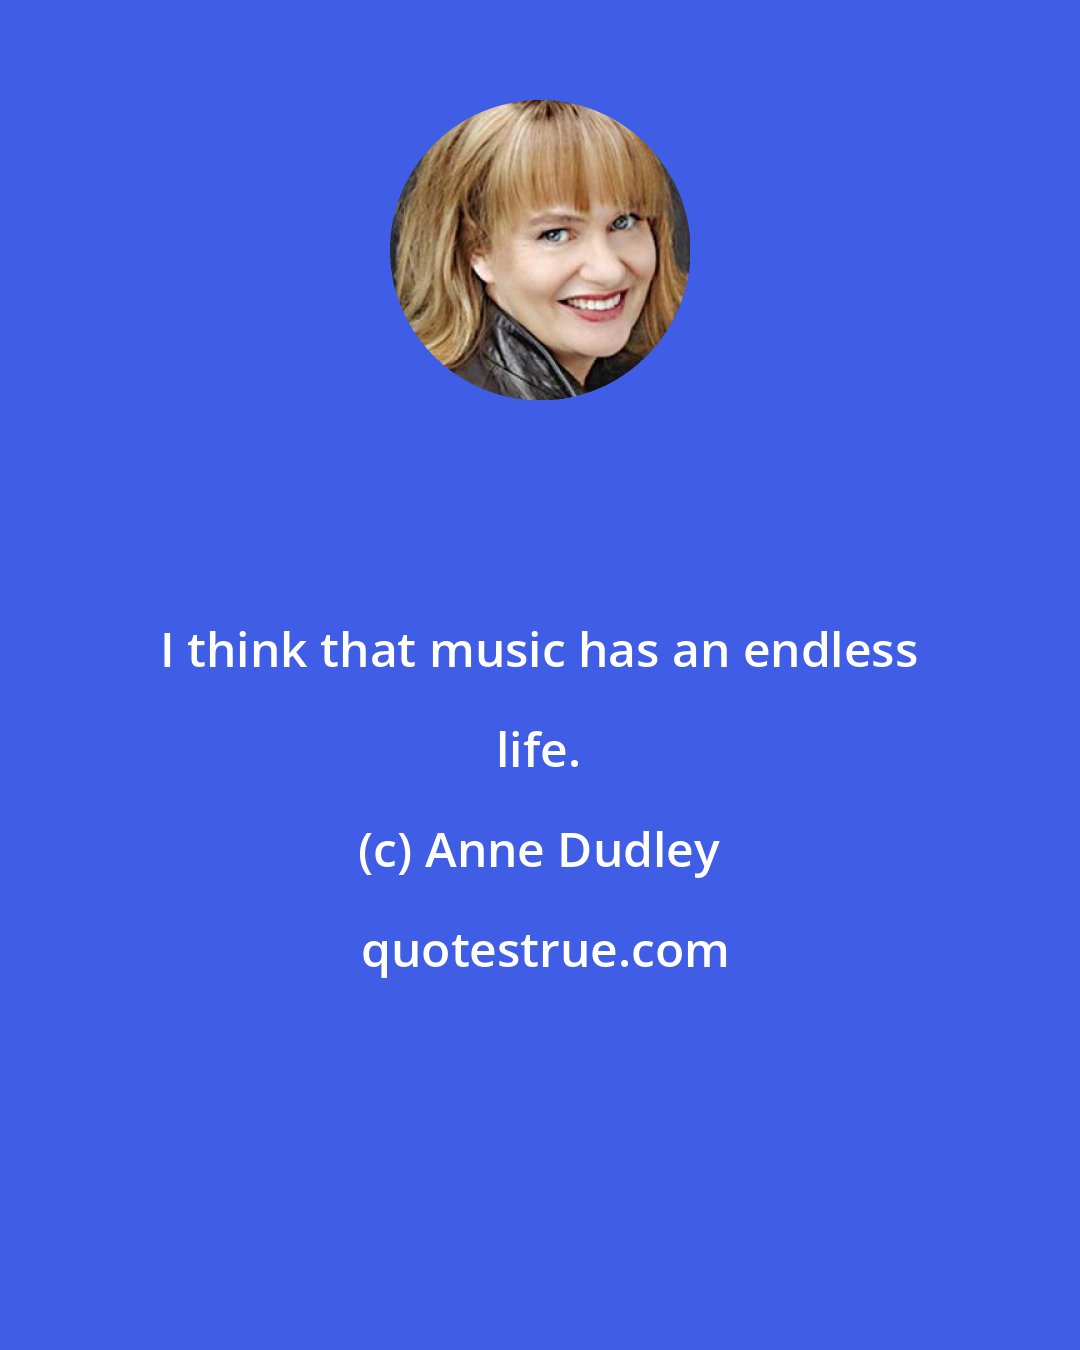 Anne Dudley: I think that music has an endless life.